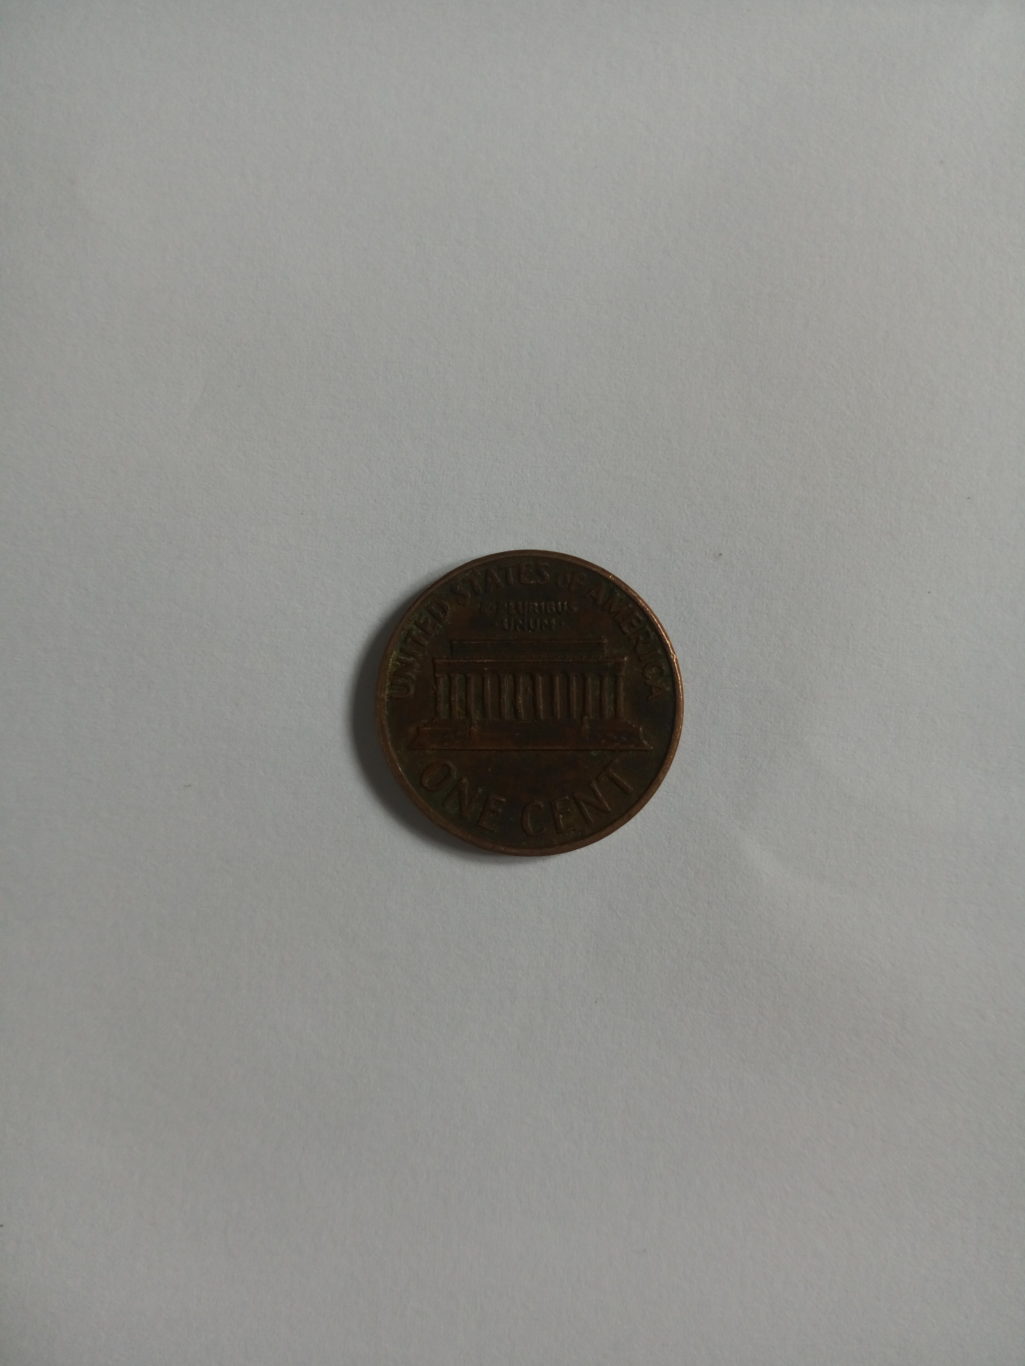 1970_liberty united states of america one cent